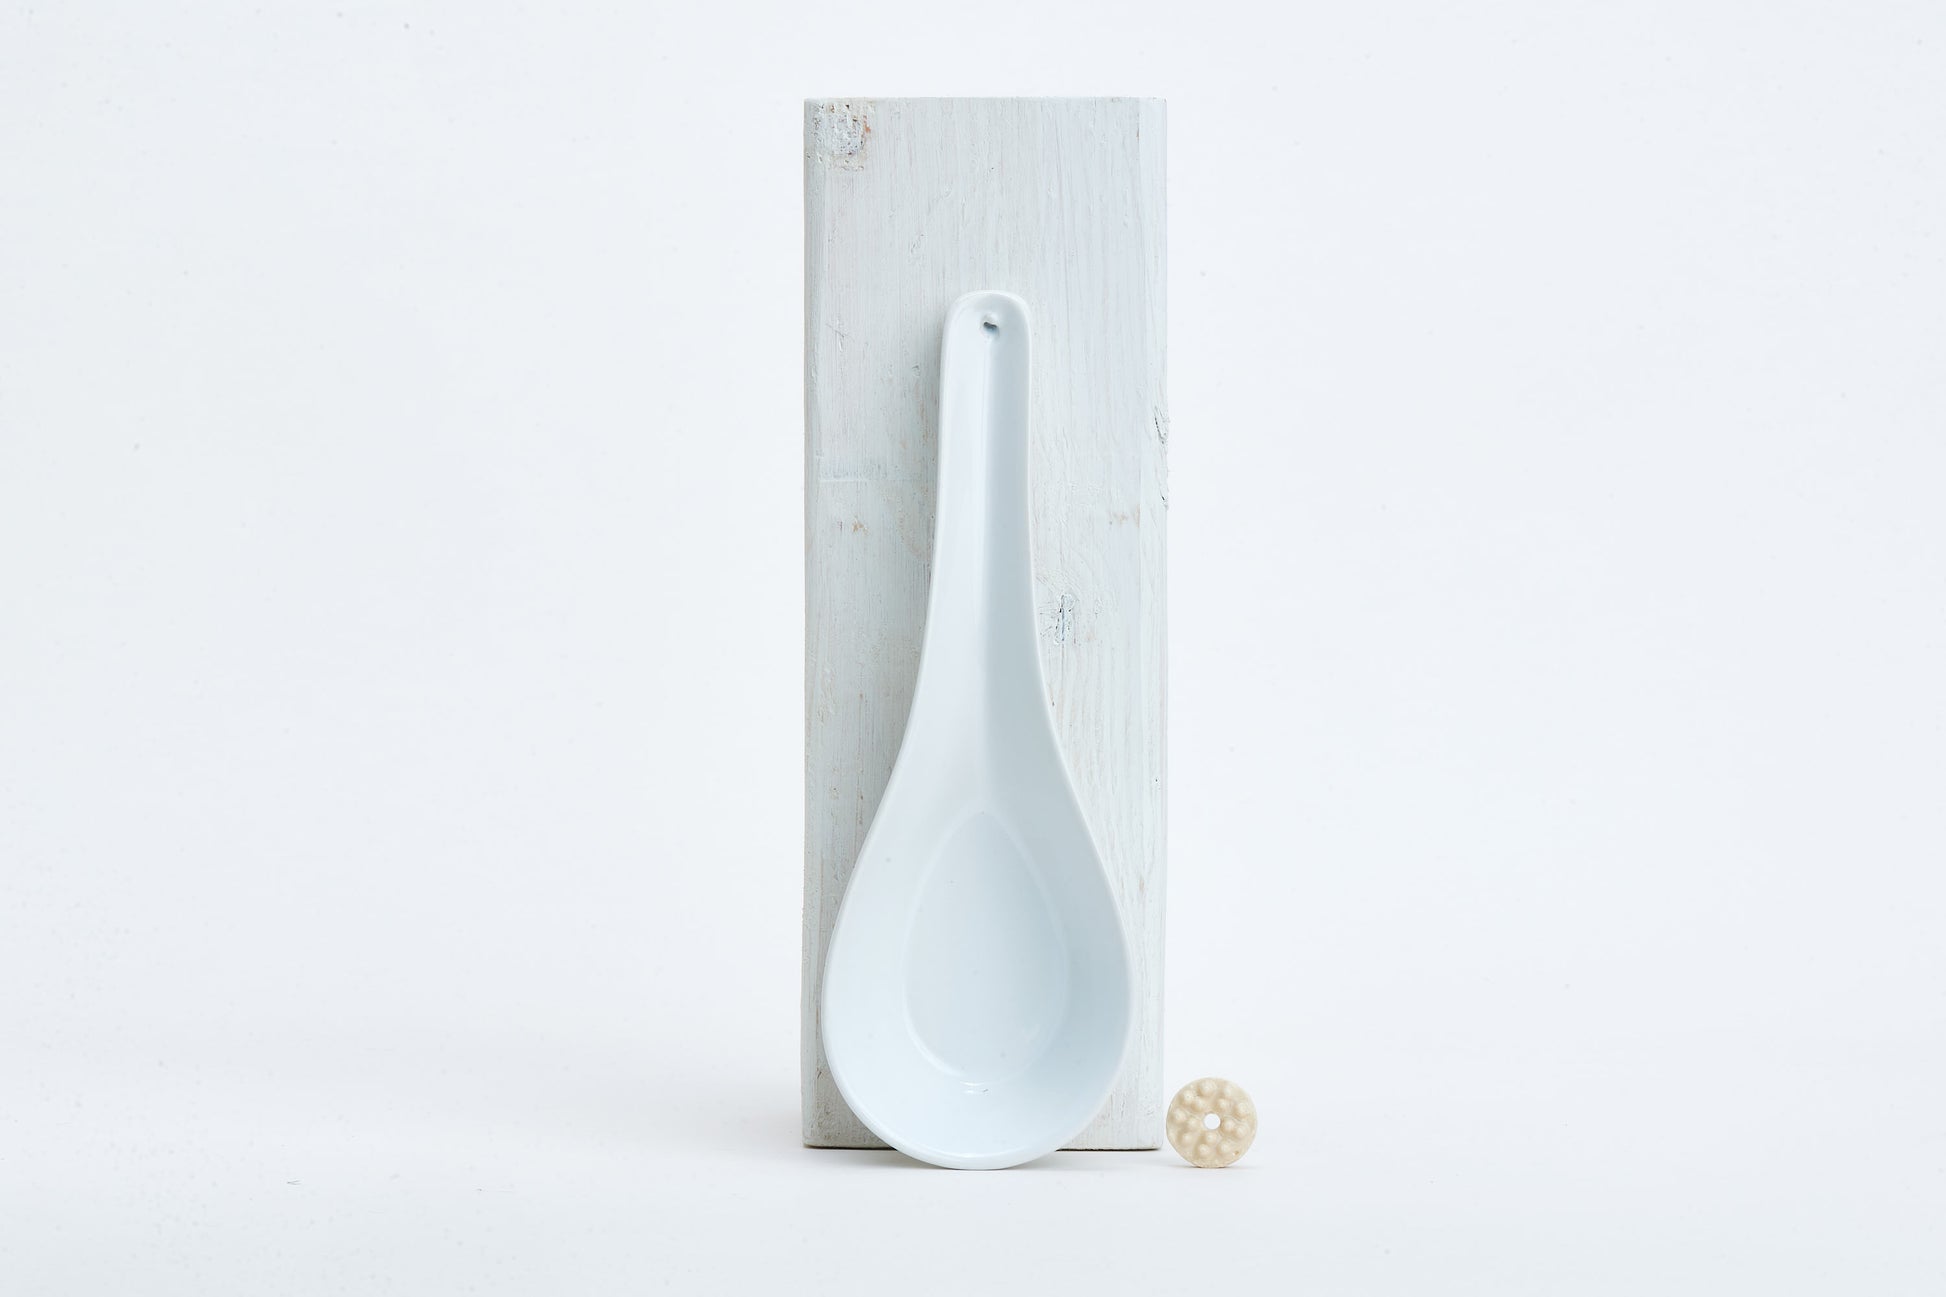 Incense Burner Spoon - Lucid and Real